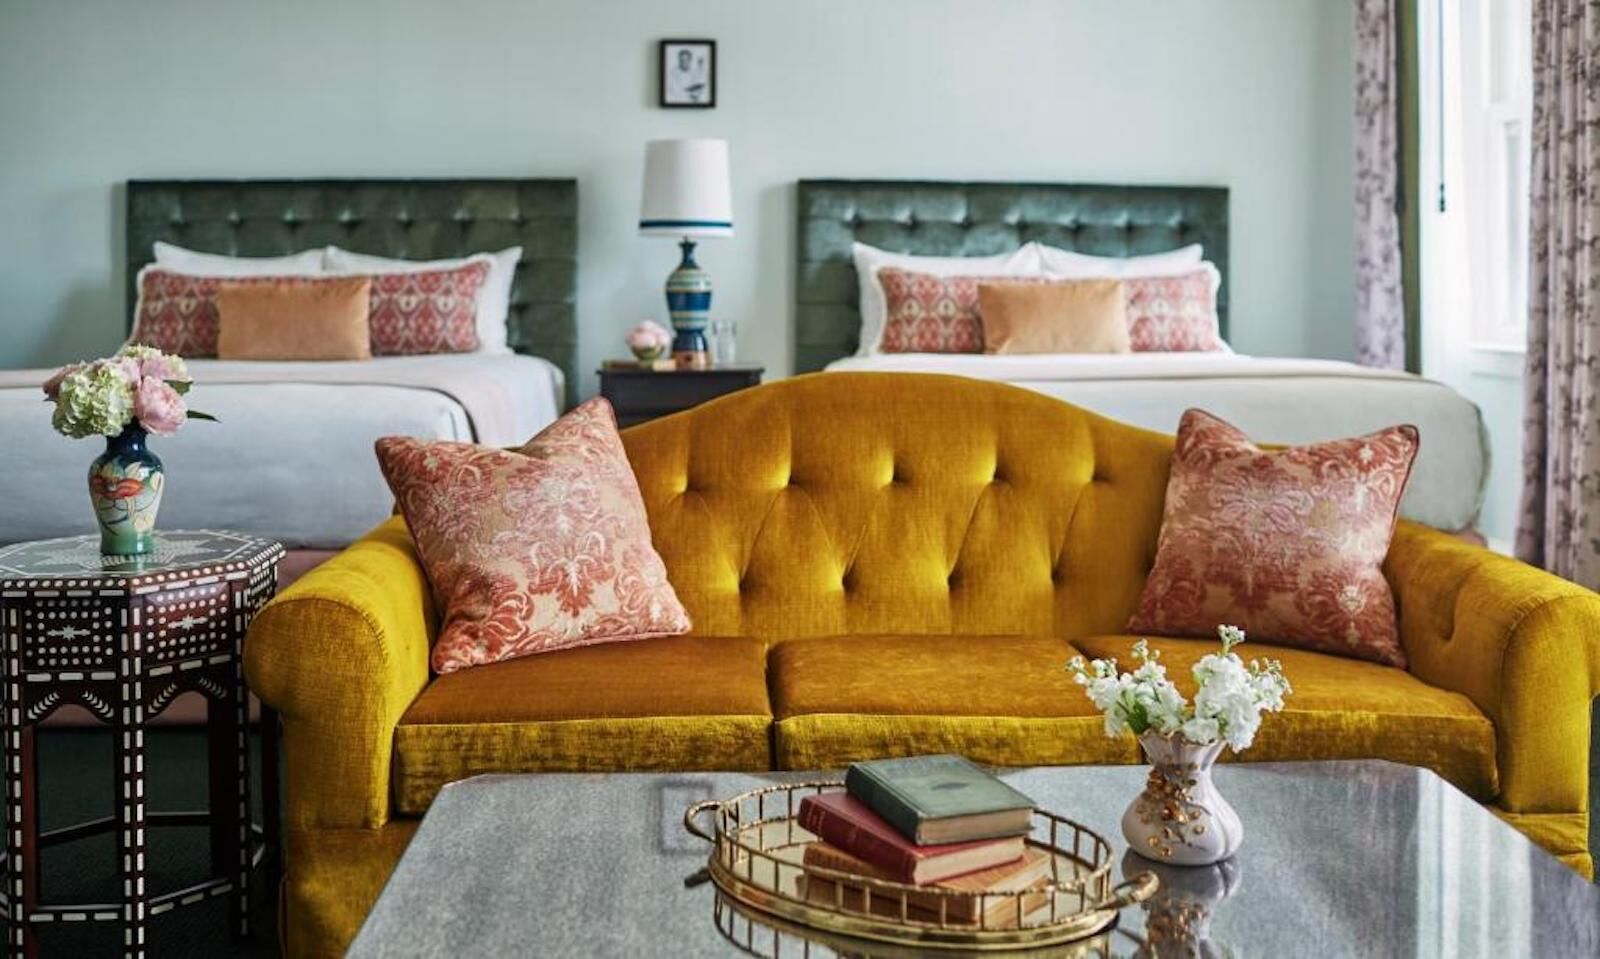 A yellow velvet couch in a room at the Pontchartrain Hotel with pink throw pillows and thwo beds in the background